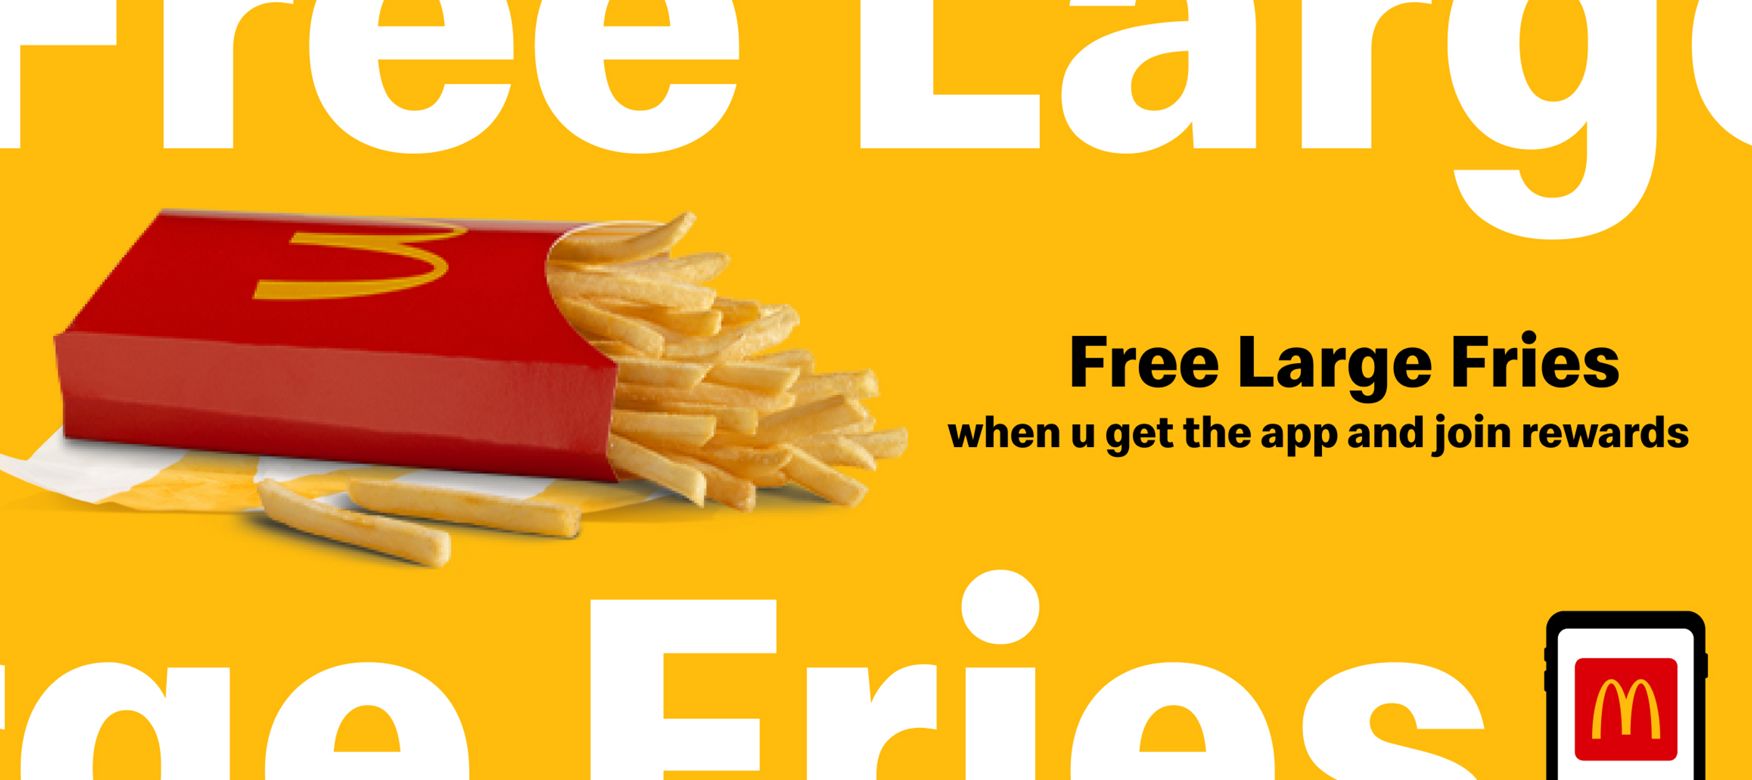 FREE McDonald's French Fries for the Rest of the Year?! Say No More. 